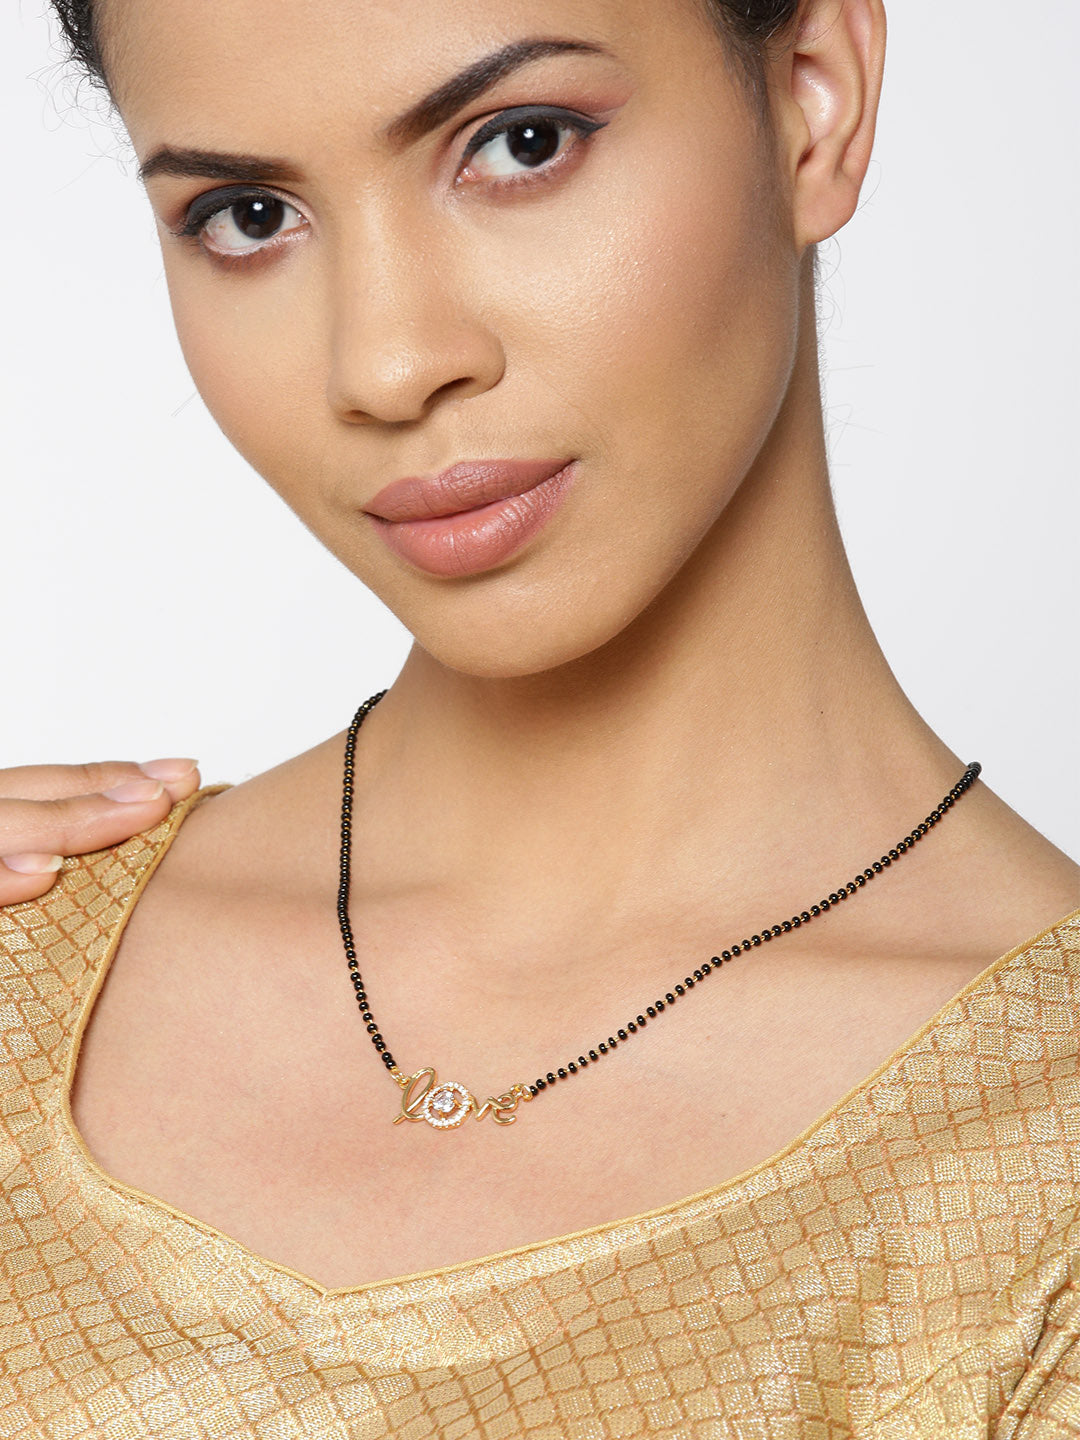 Gold-Plated AD Studded LOVE Message Mangalsutra With Black Beads Chain